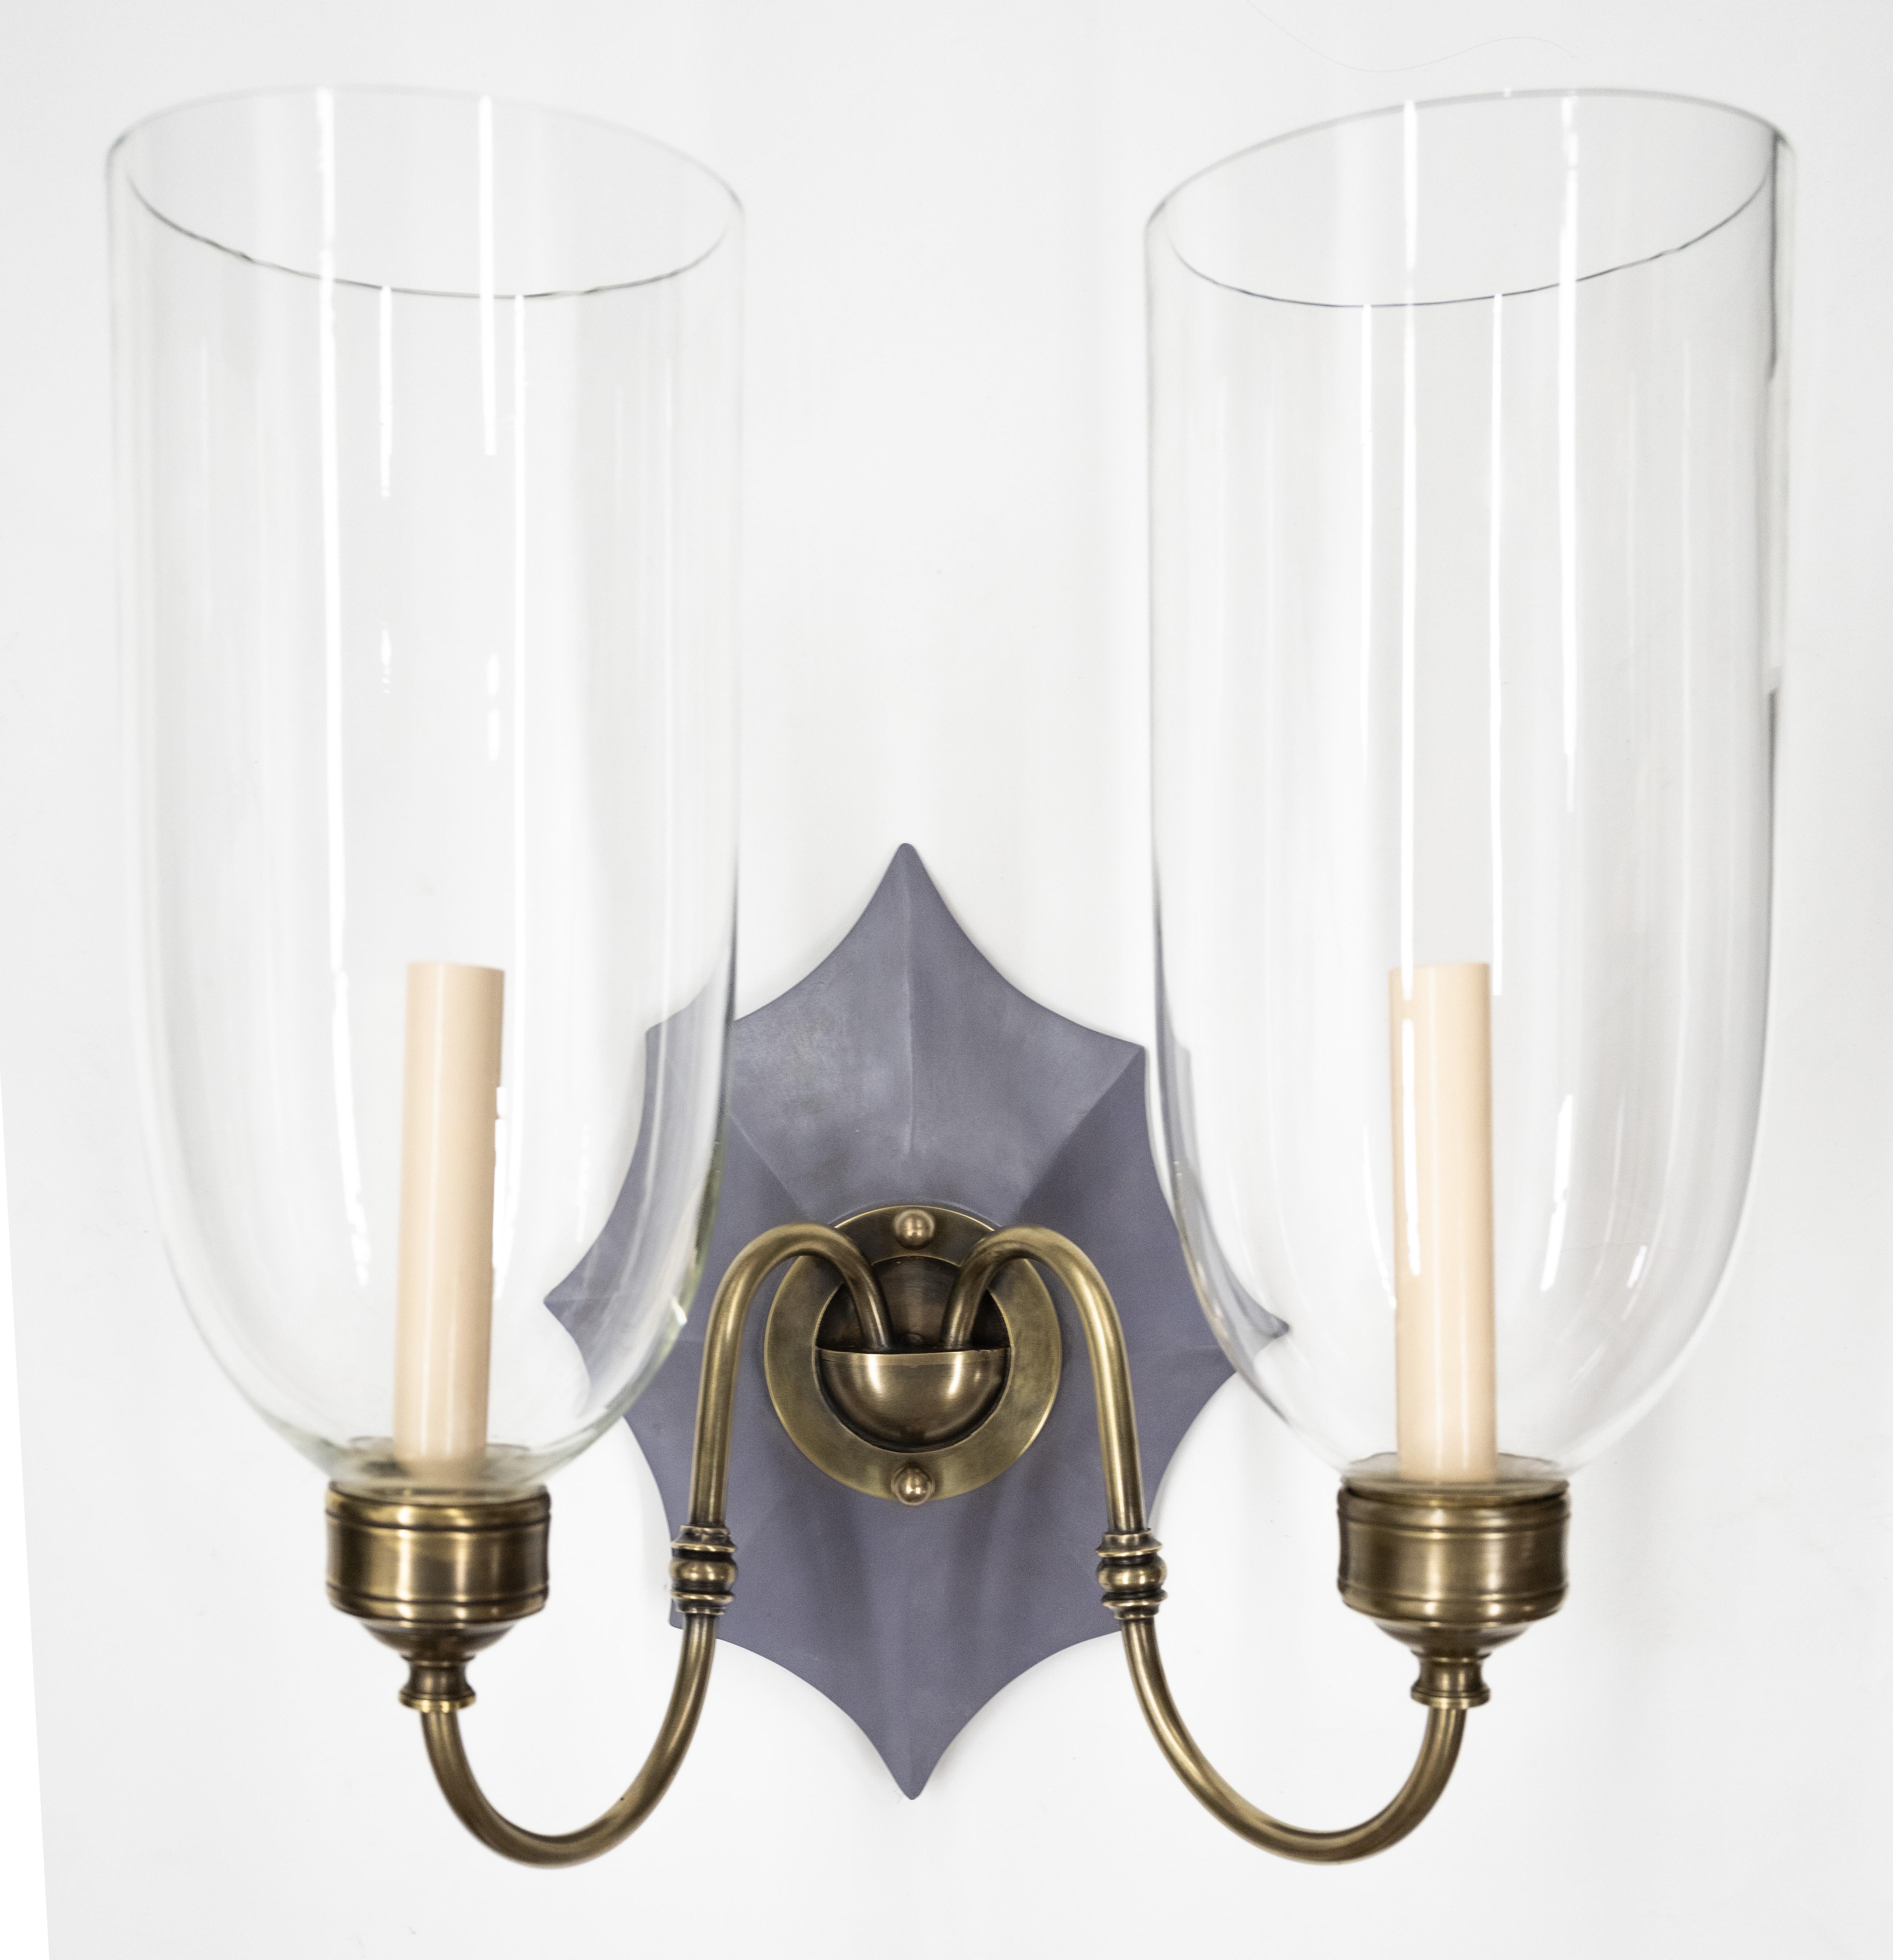 A pair of hand-carved Boissy sconces from mahogany Georgian-style backplates with a painted finish, patinated brass sconce fittings, and hand-blown shades. Electrified with two candelabra-based socket per sconce. Our custom hurricane sconces are